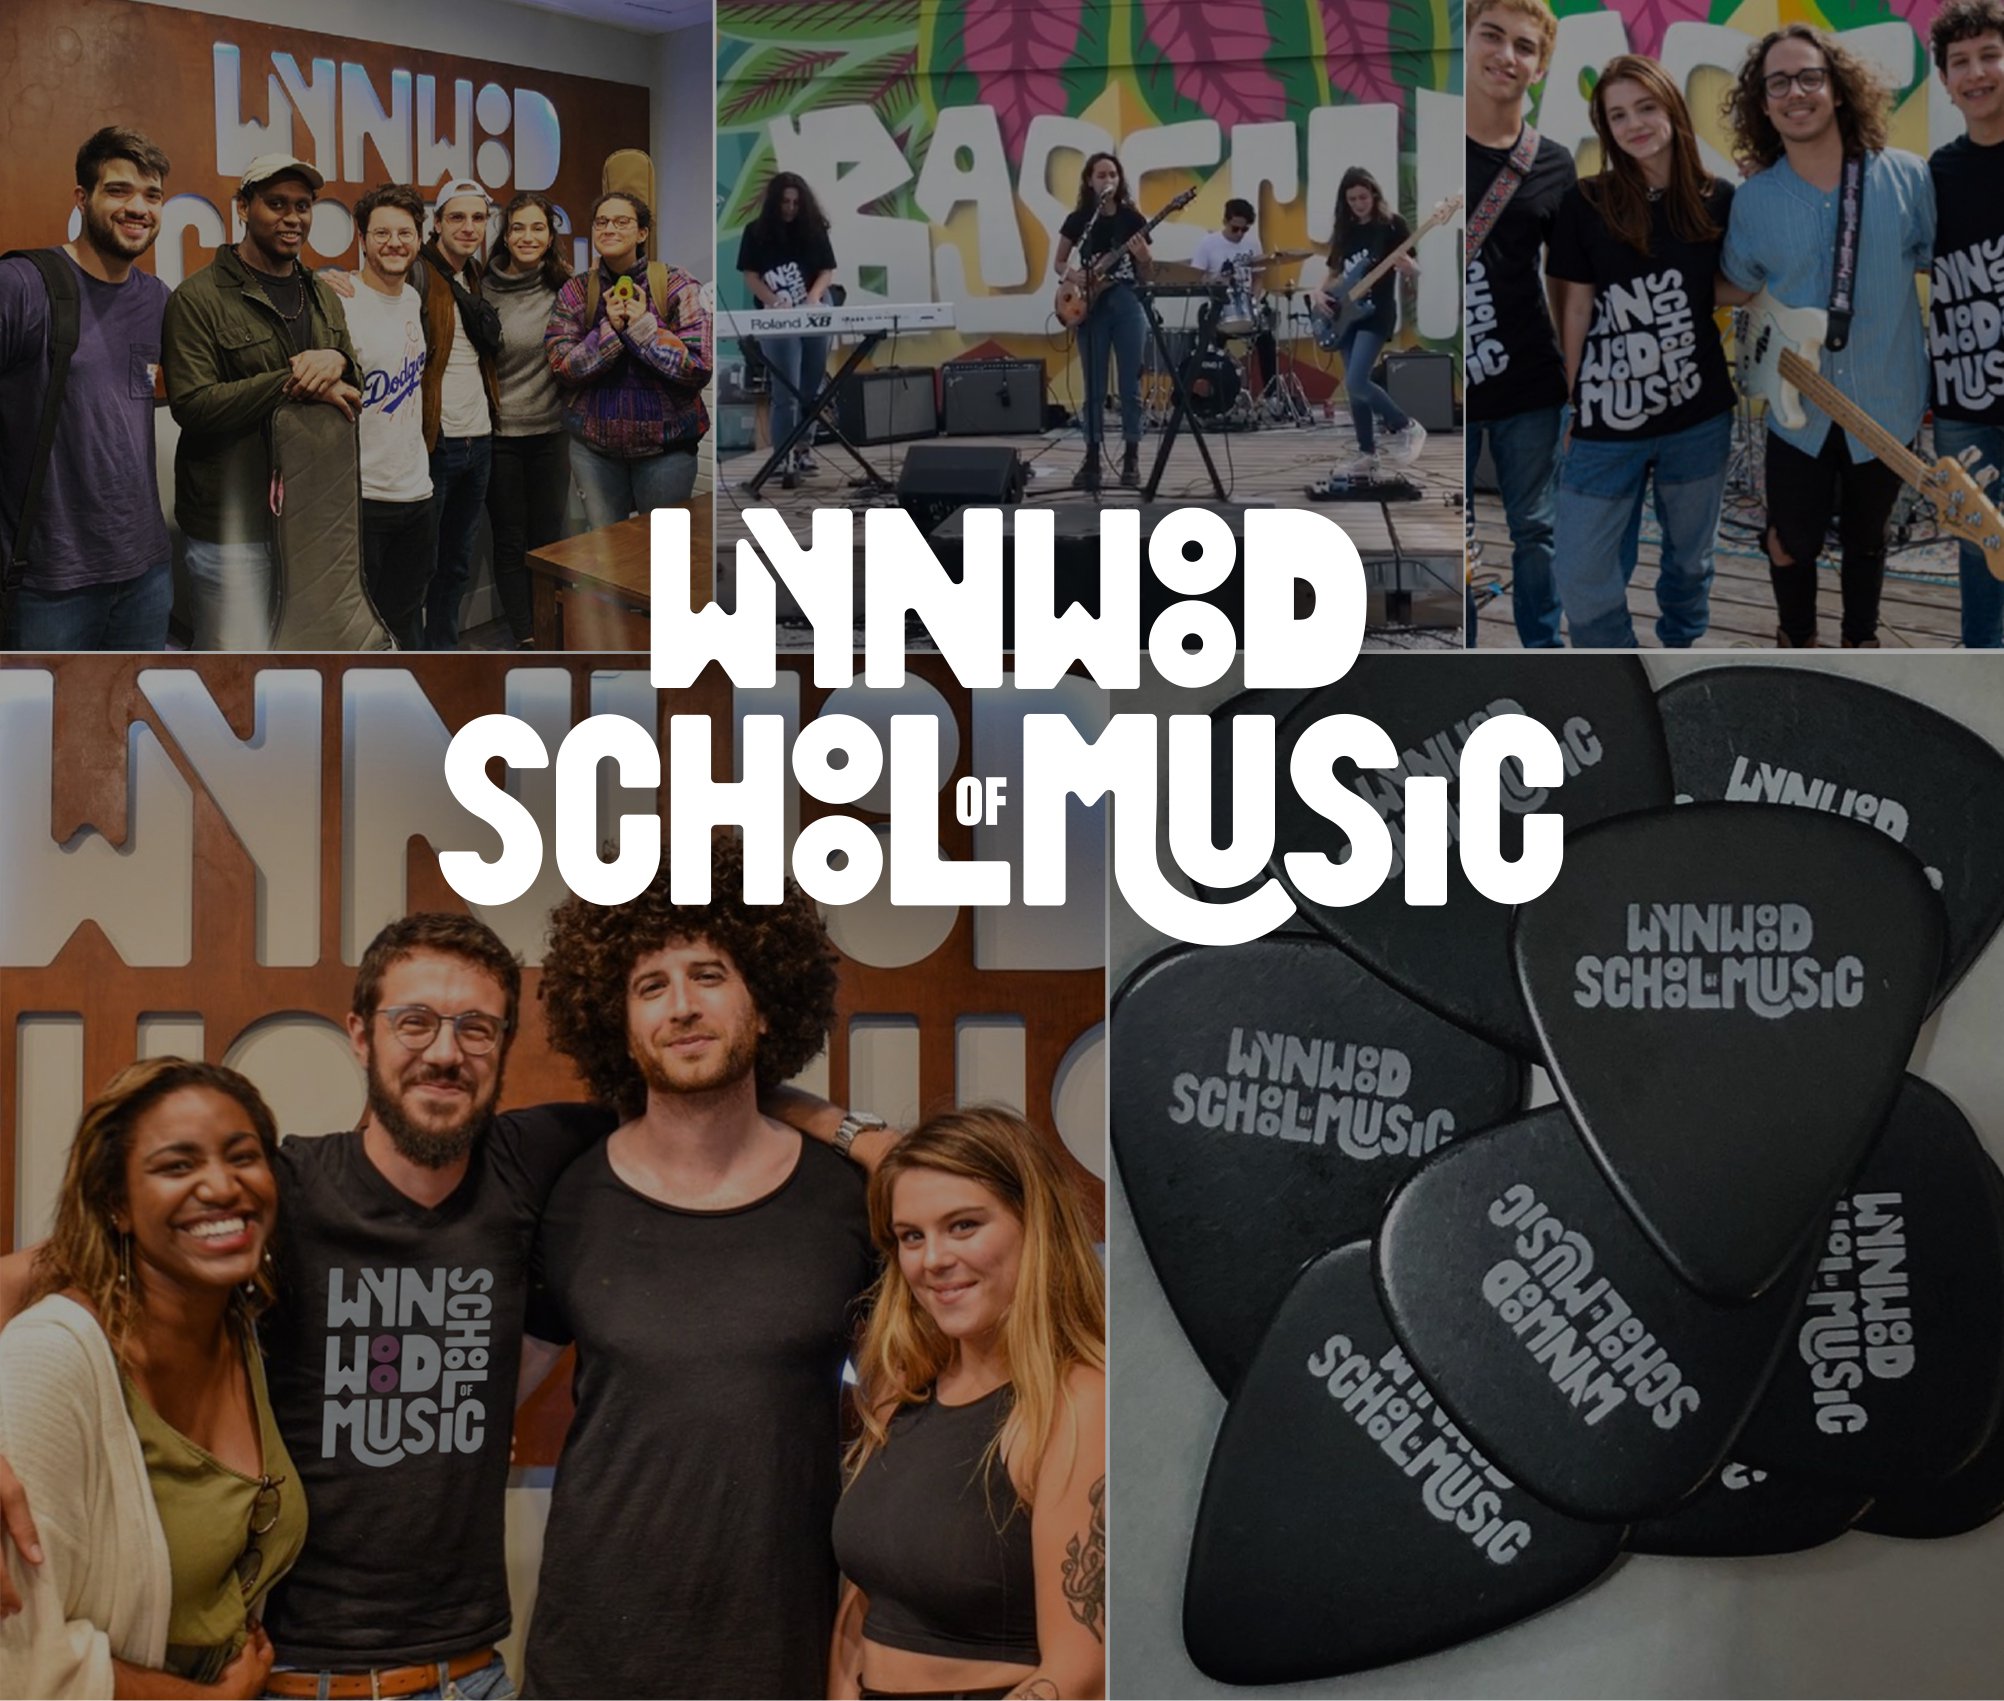 wynwood school of music logo with photo grid of students and teachers